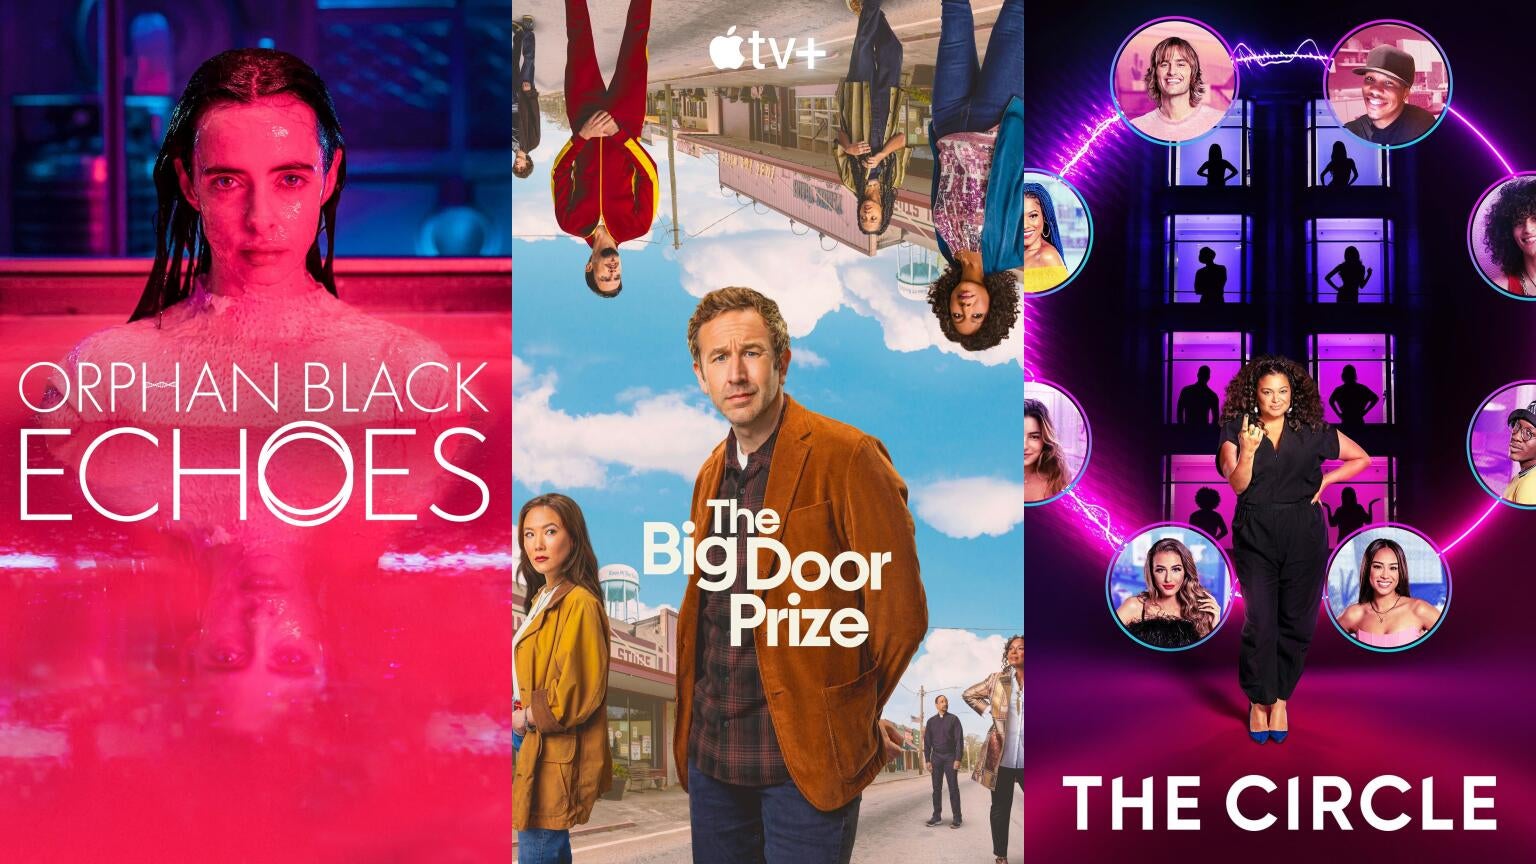 Posters for AMC's "Orphan Black: Echoes," Apple TV+'s "The Big Door Prize," and Netflix's "The Circle"